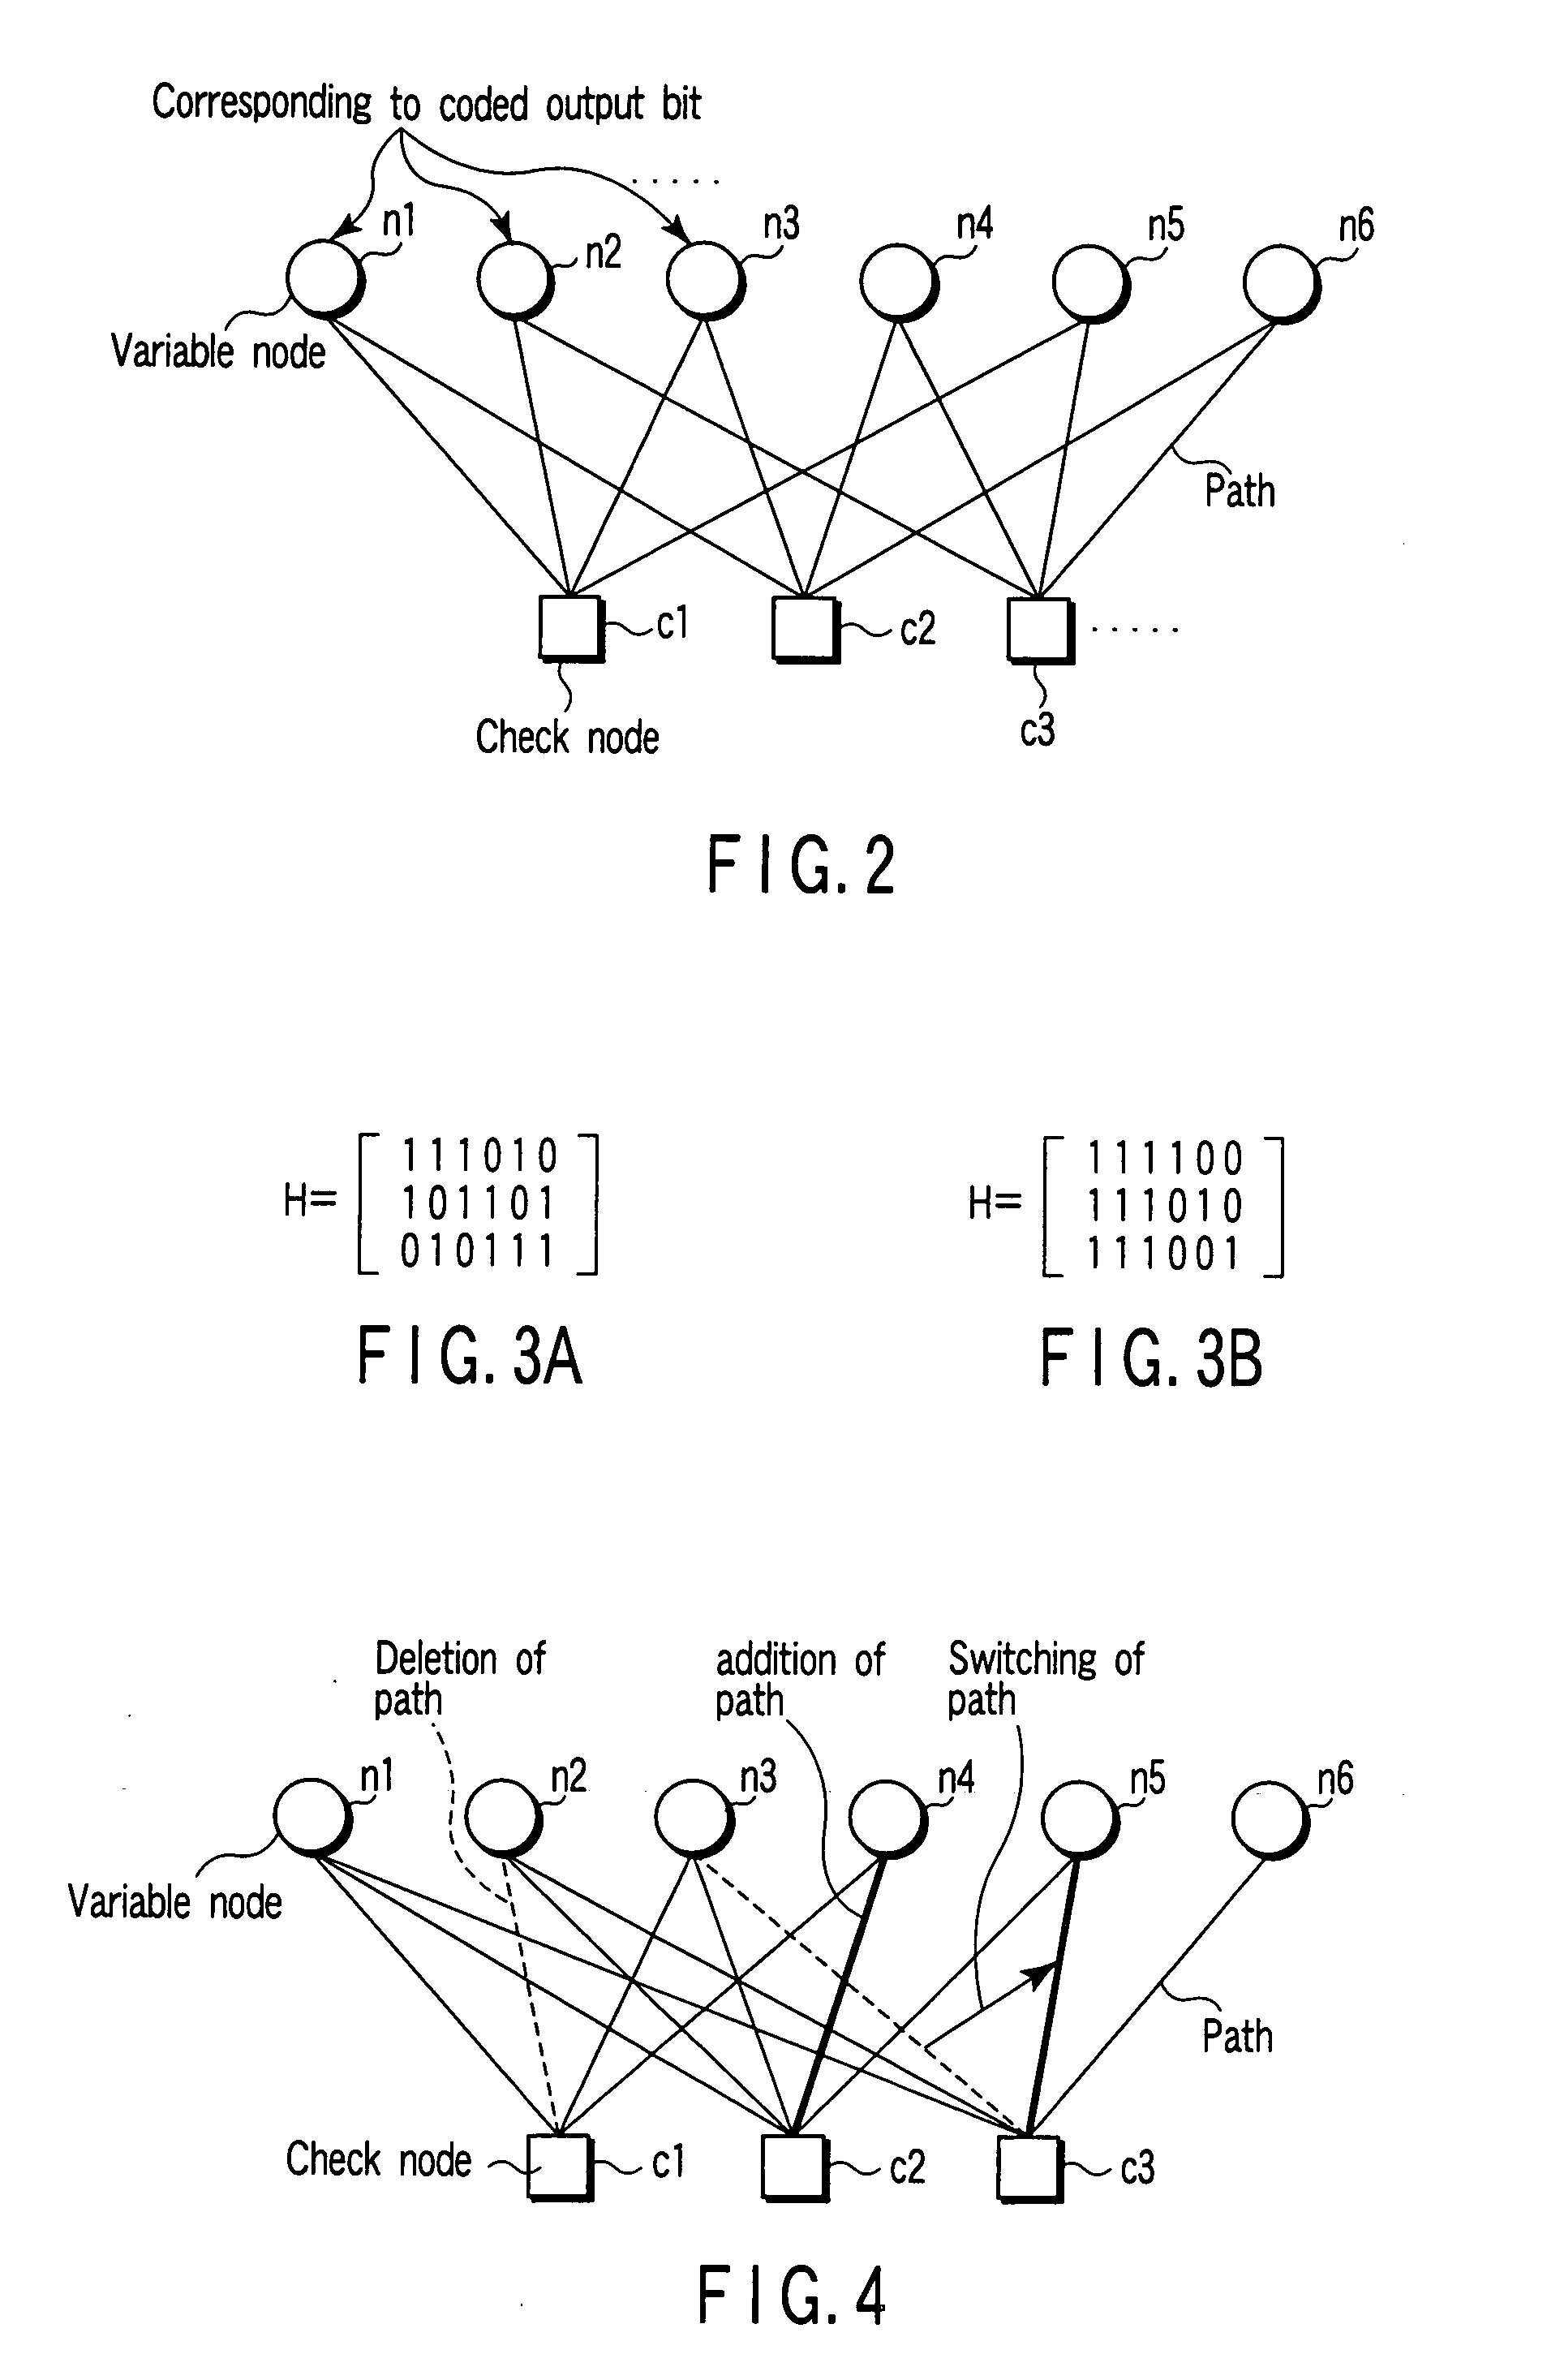 Mapping method for encoded bits using LDPC code, transmitting and receiving apparatuses employing this method, and program for executing this method